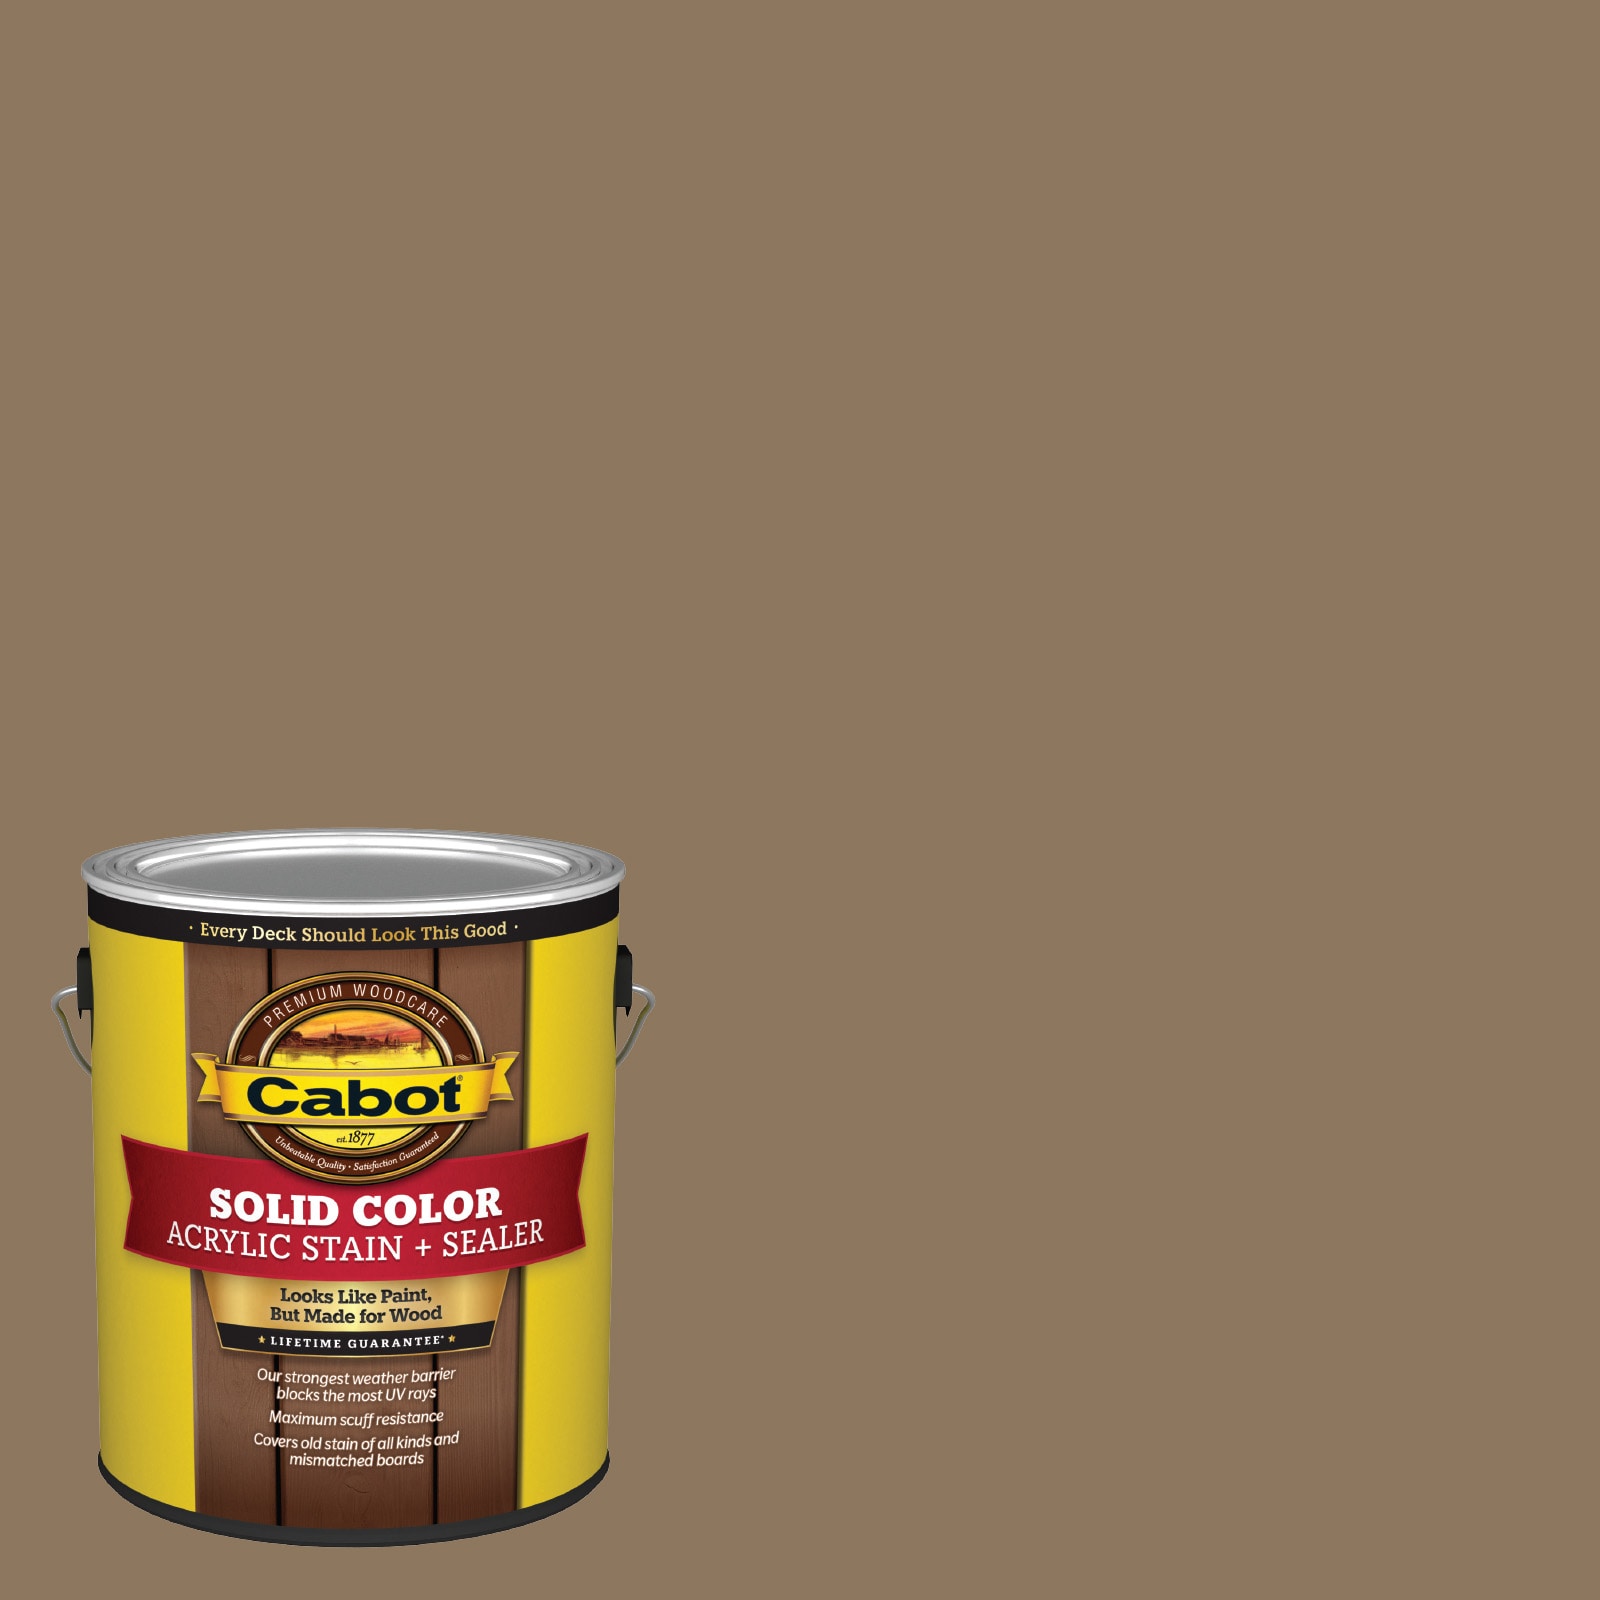 Sealer　Cabot　Solid　and　department　Wood　Stains　in　Acorn　Exterior　(1-Gallon)　Exterior　the　Stain　at